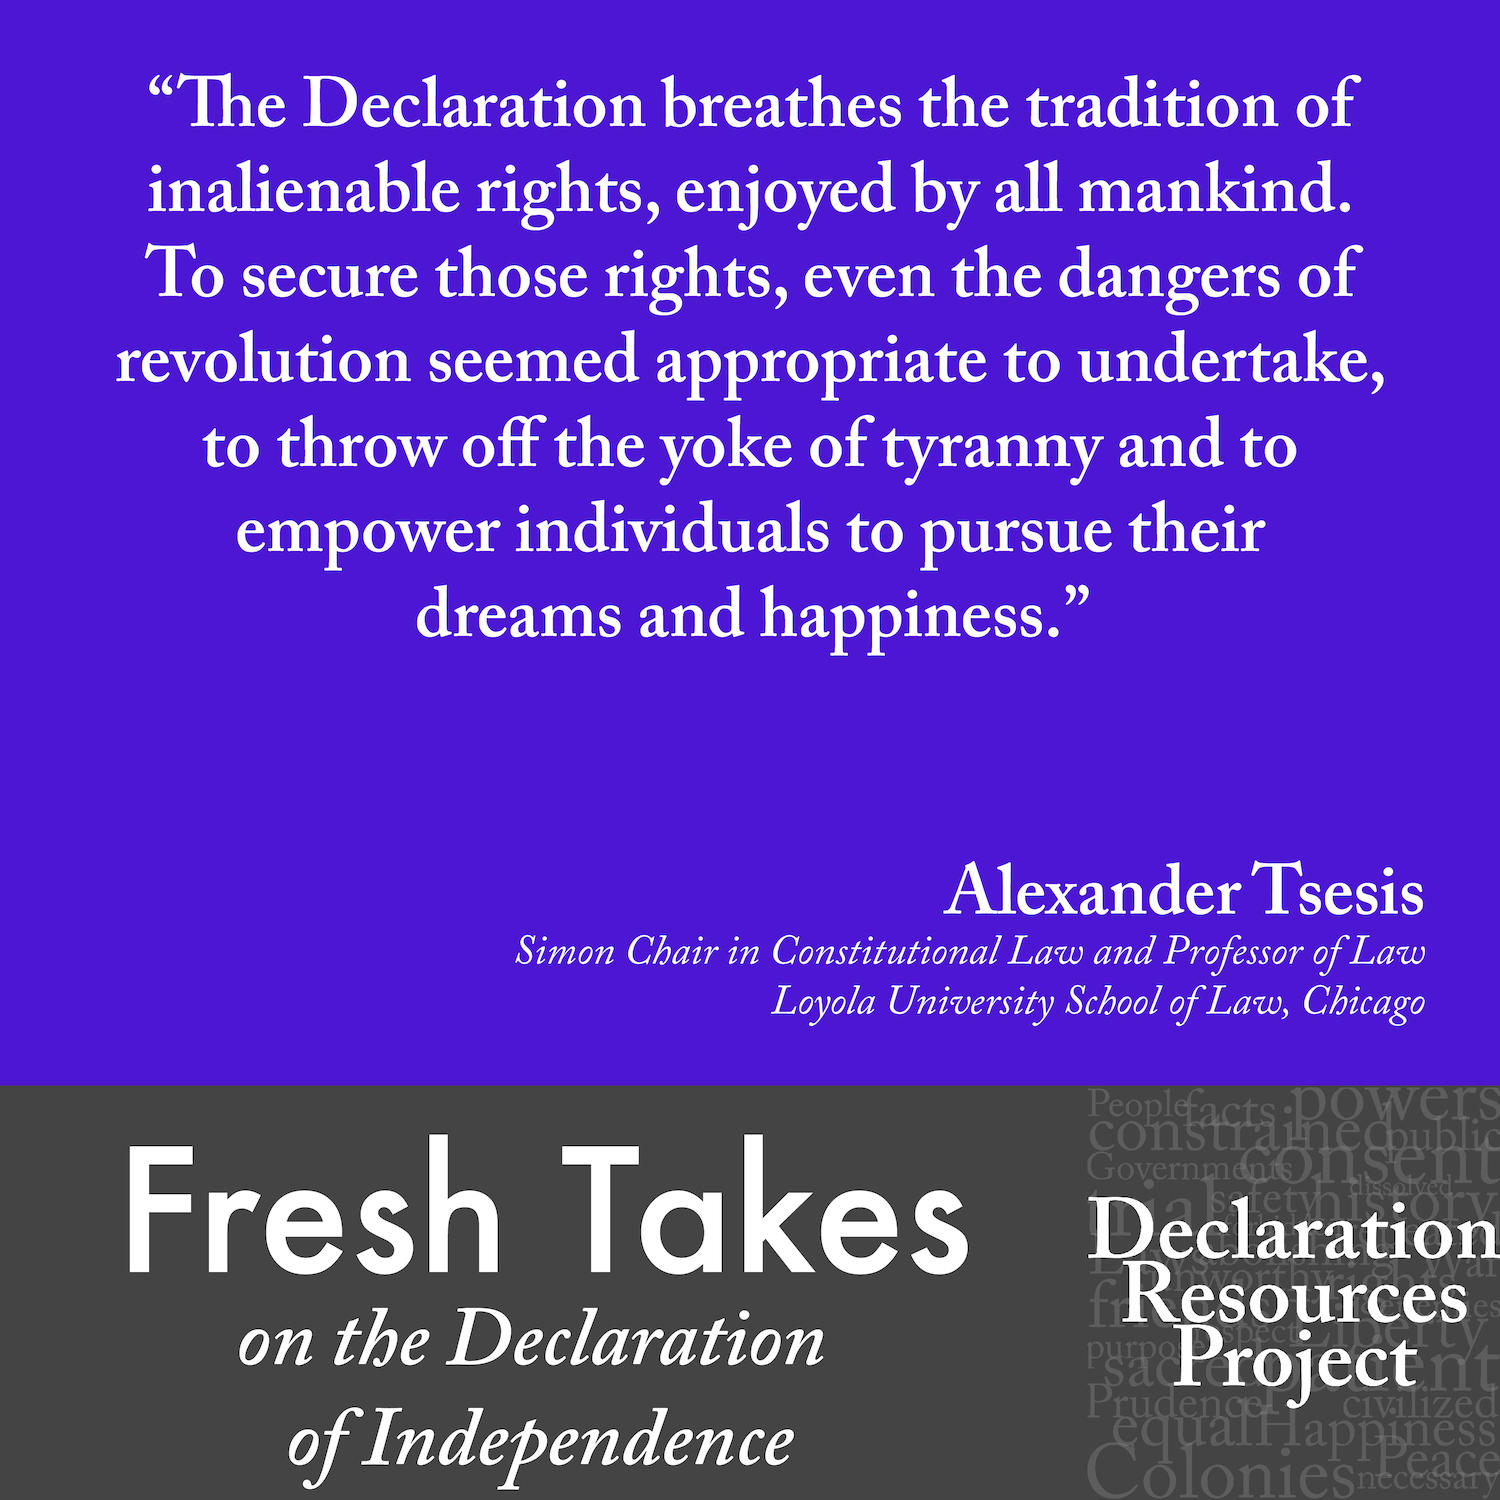 Alexander Tsesis's Fresh Take on the Declaration of Independence